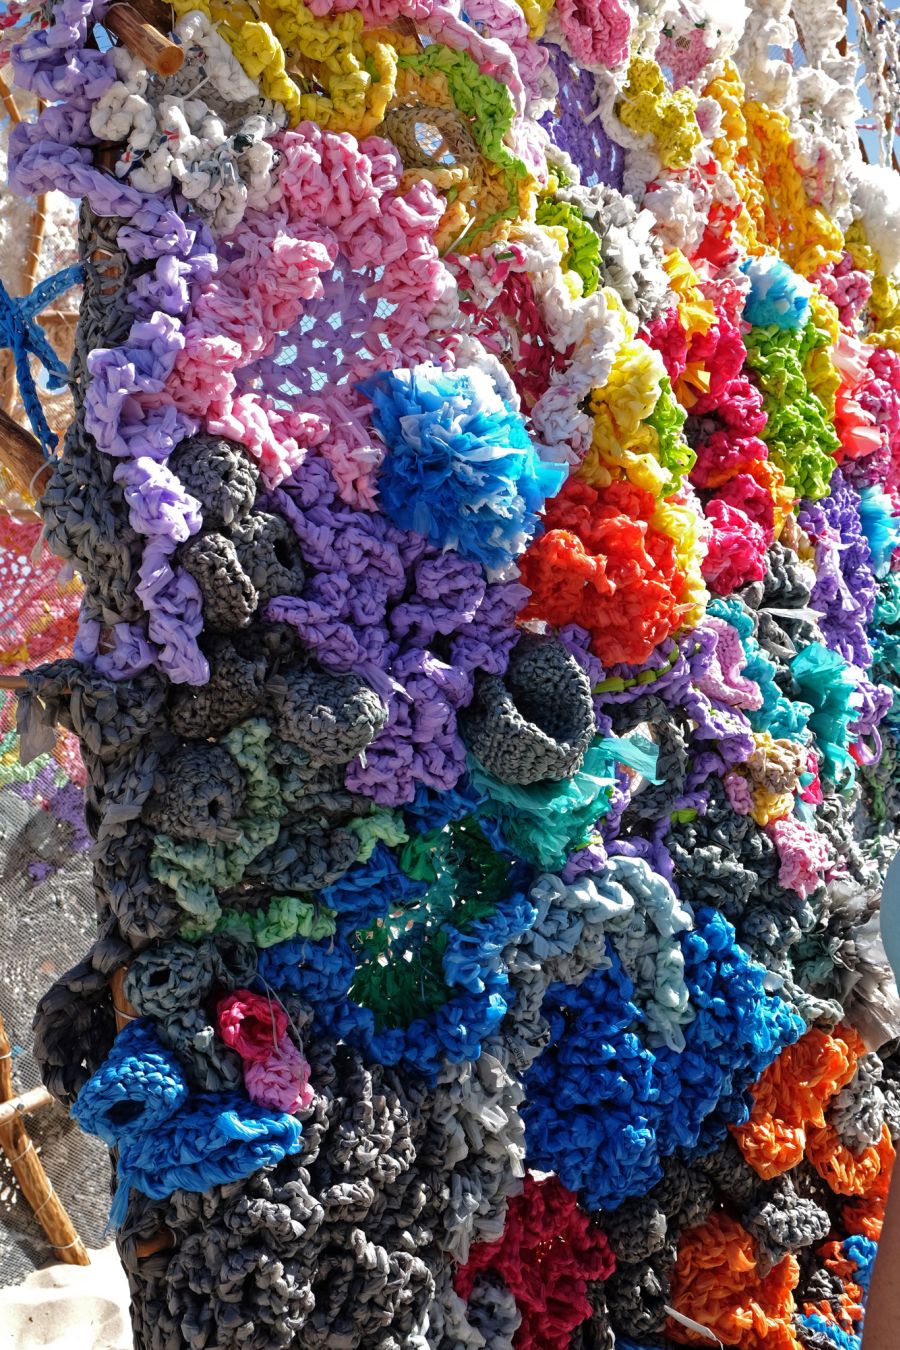 Rescheduling permanence by Helen Seiver. Wood, crocheted plastic bags - close up.